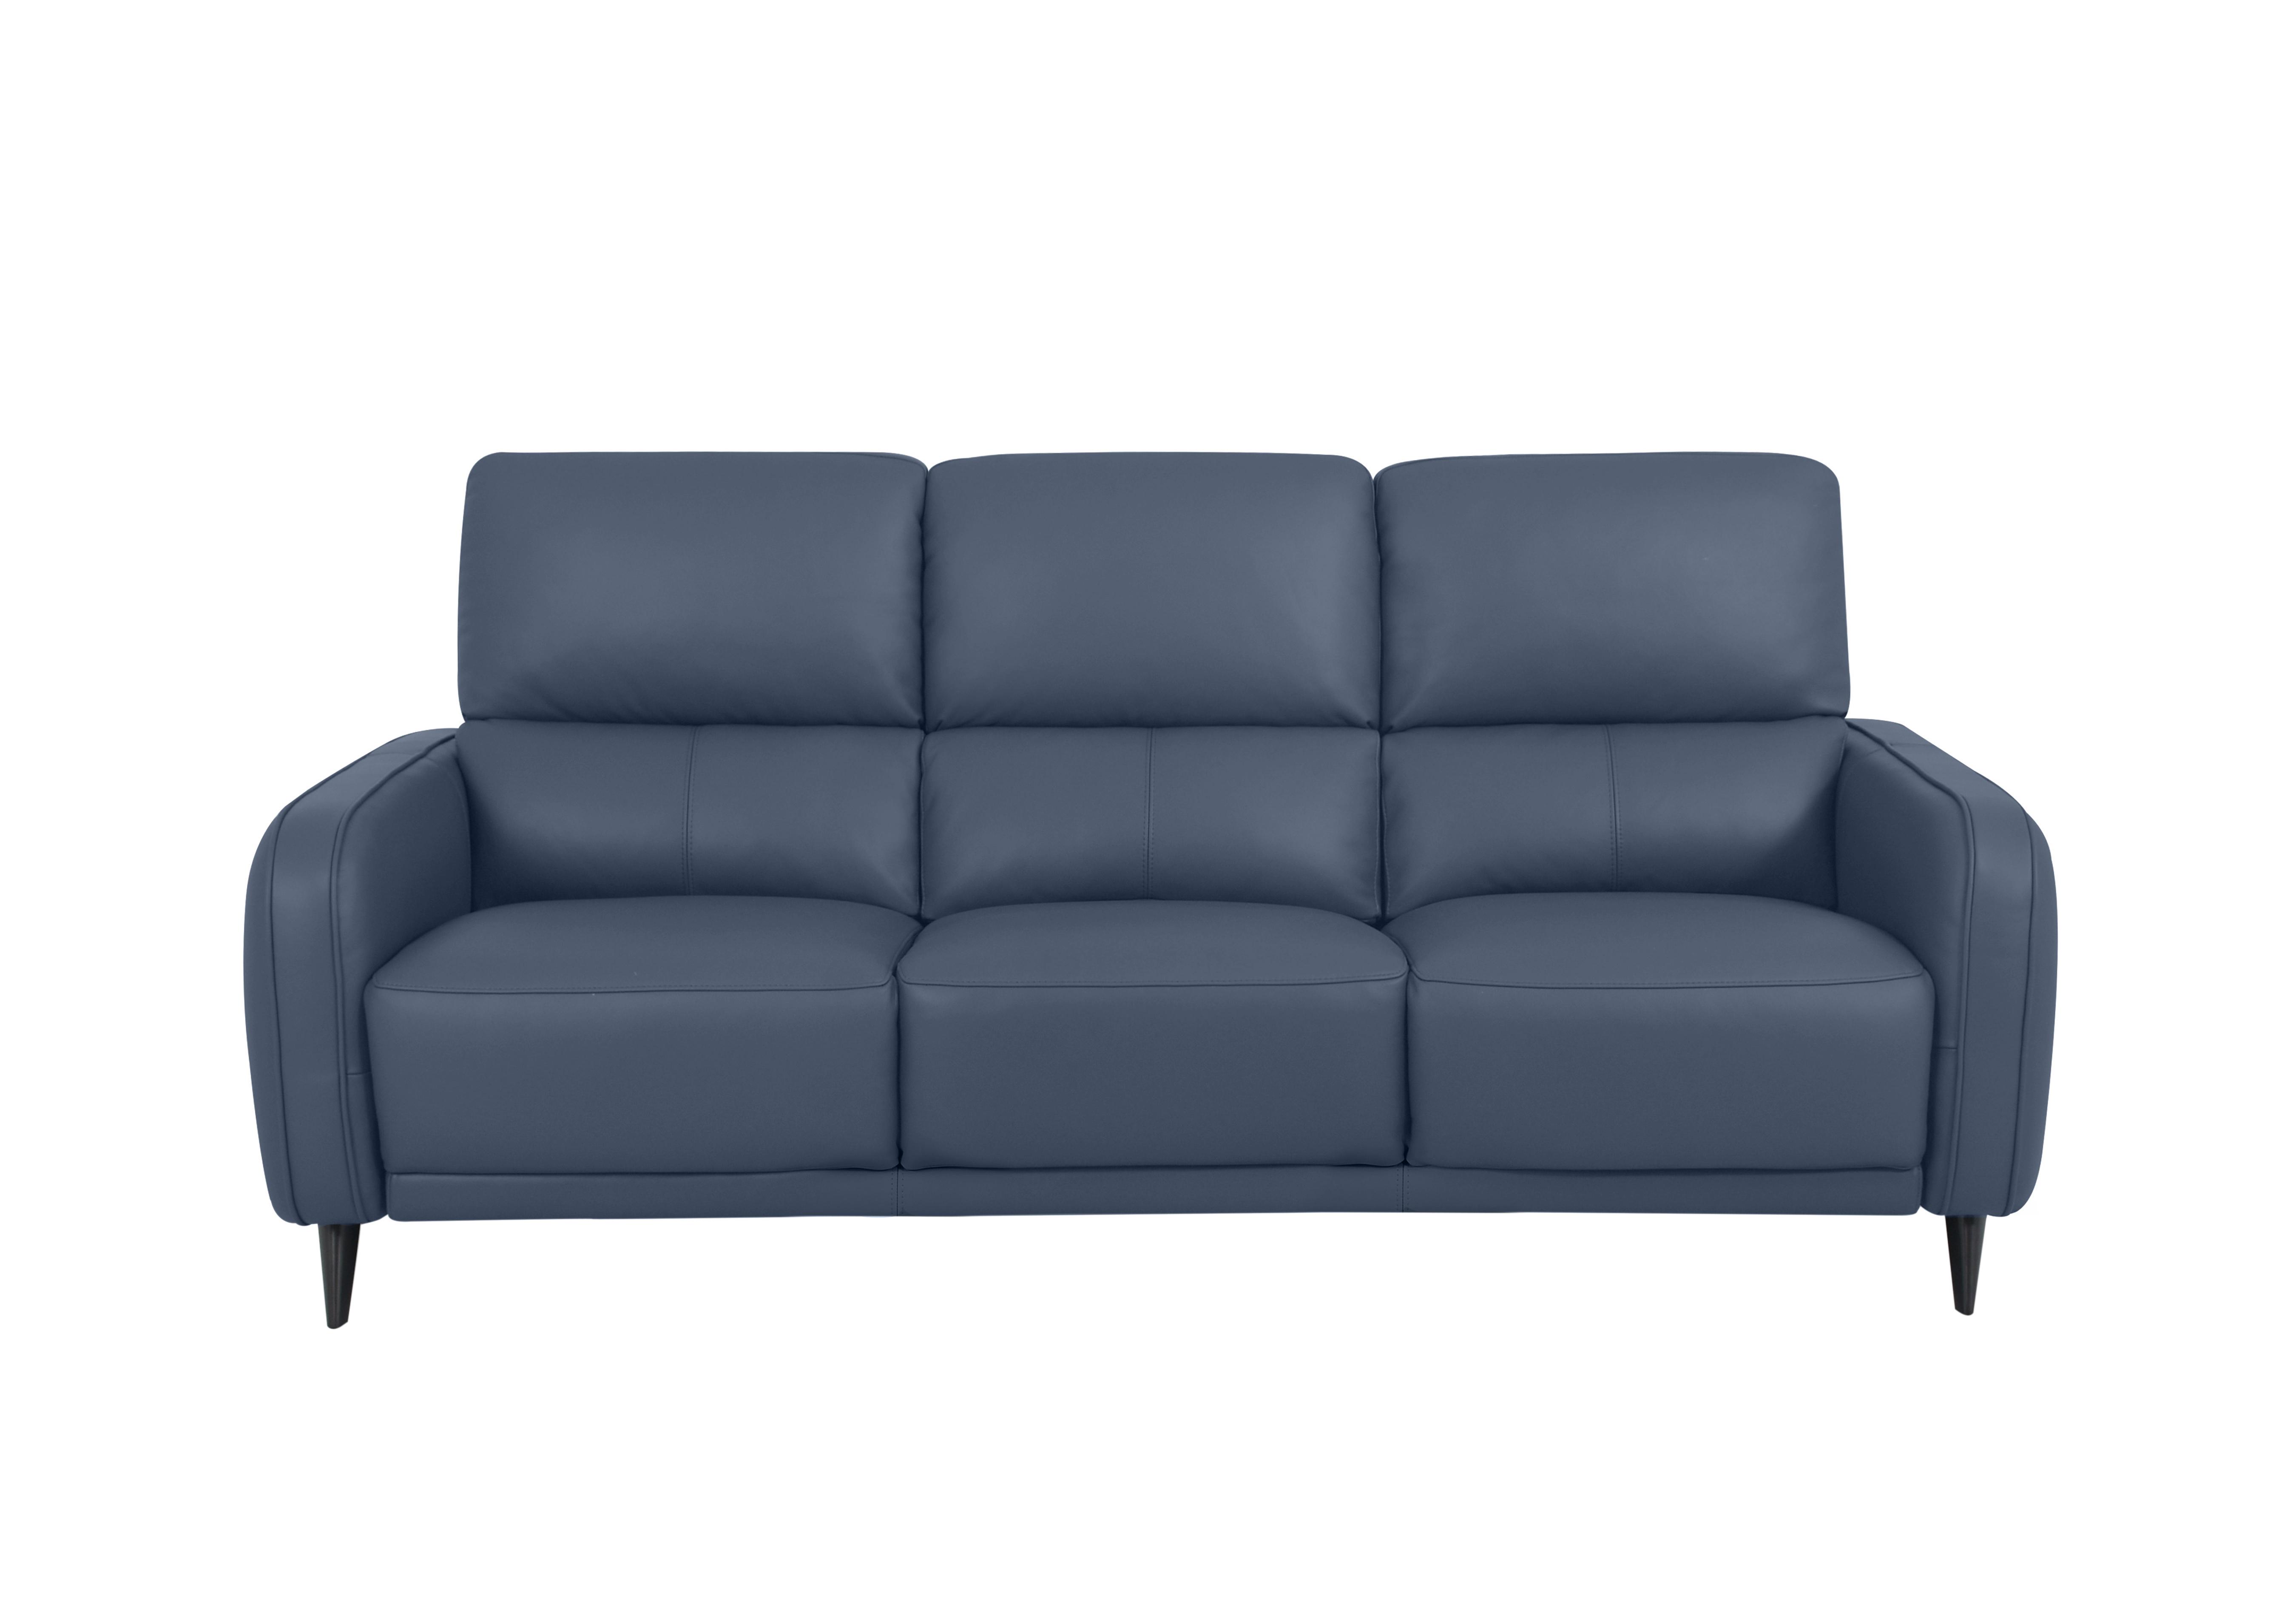 Logan 3 Seater Leather Sofa in Np-518e Ocean Blue on Furniture Village